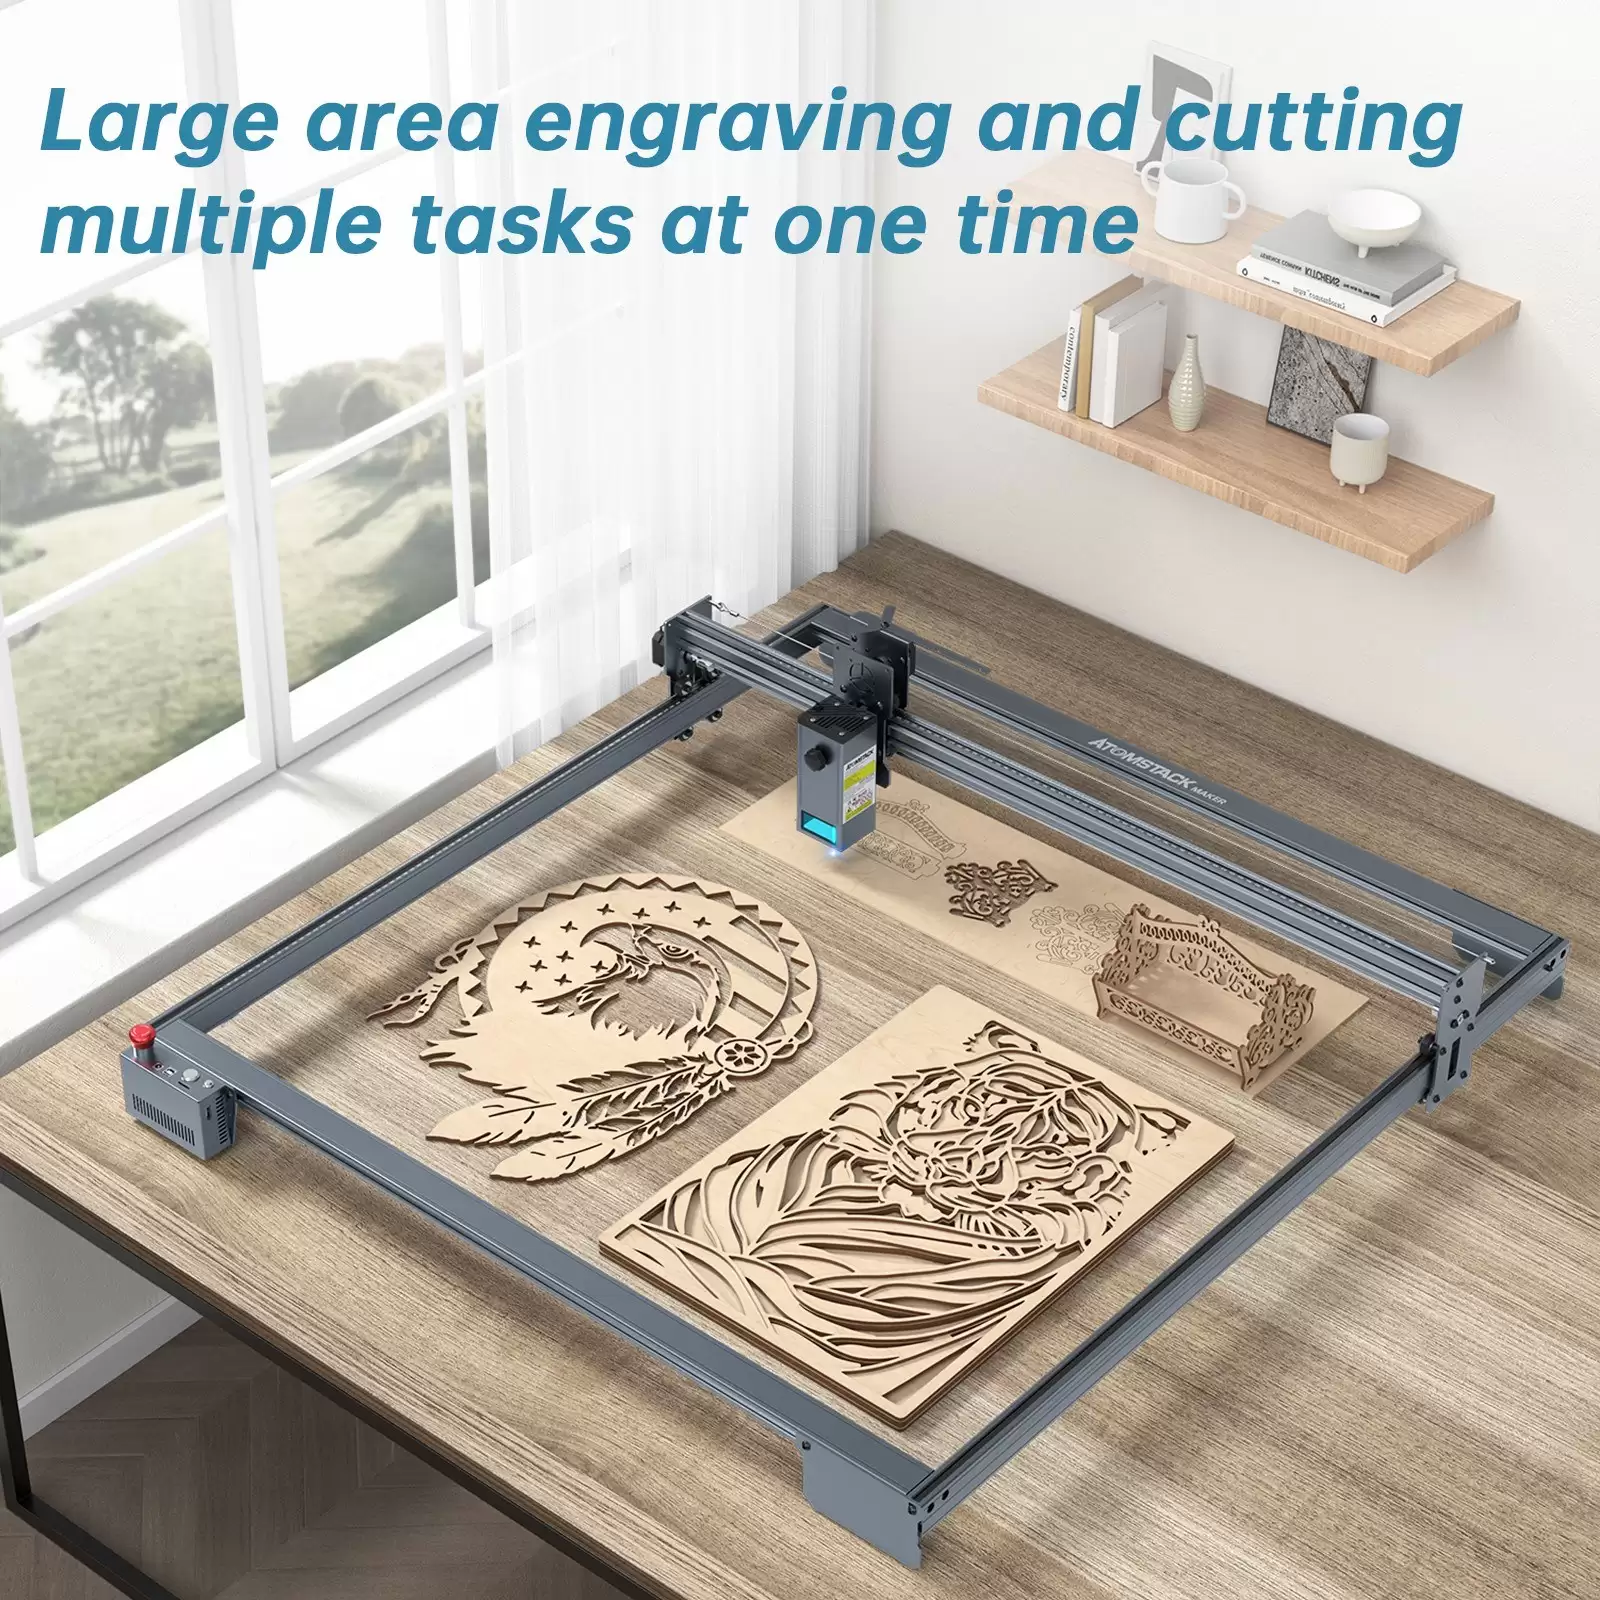 Pay Just $2787 Atomstack Maker E85 Frame For Laser Engraver ,Free Shipping With This Cafago Coupon